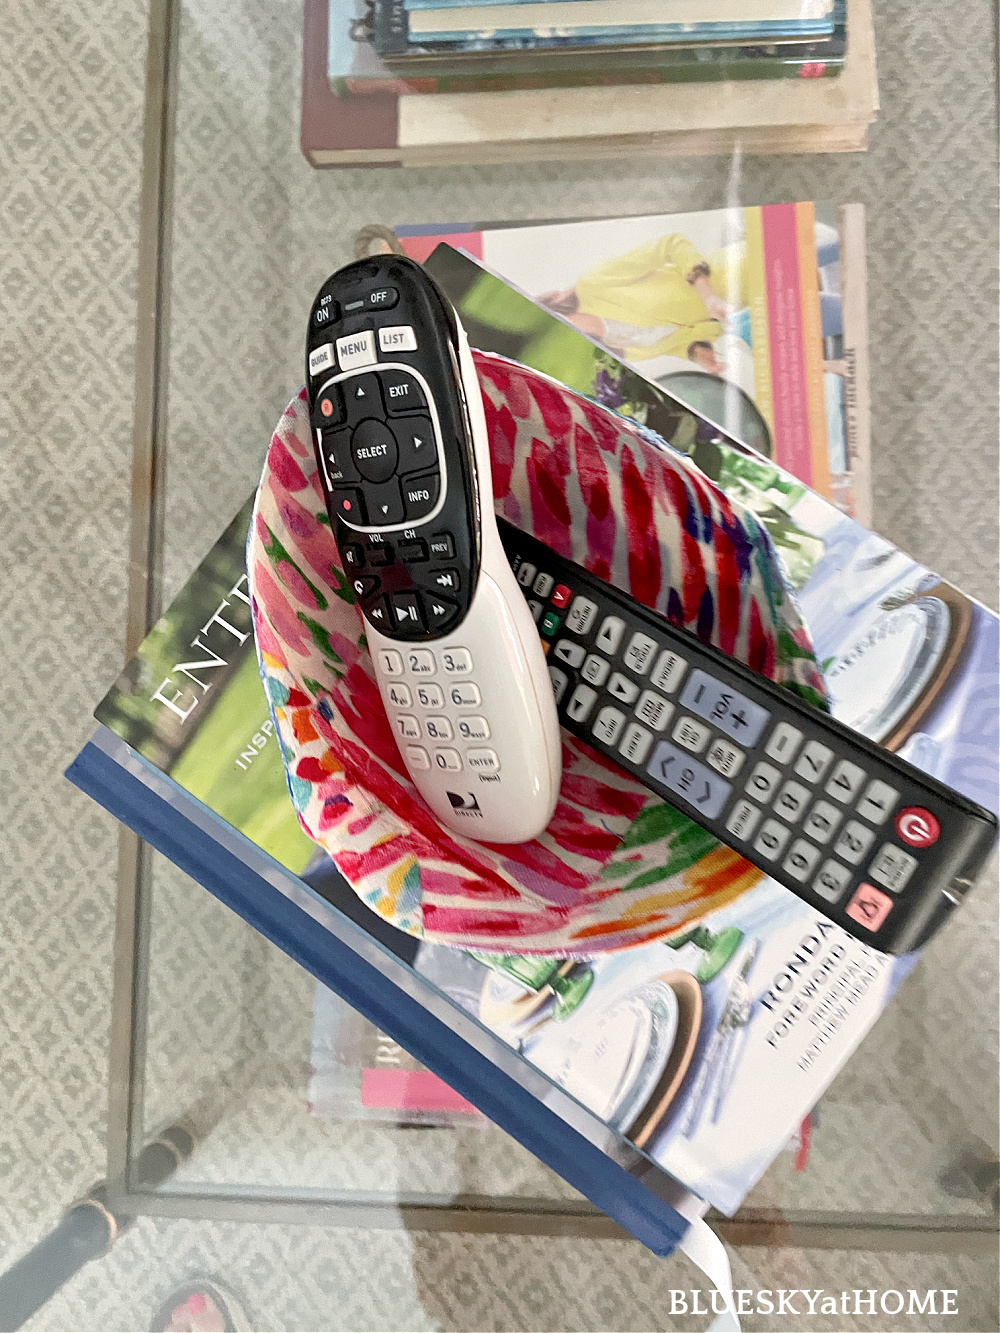 remotes in fabric bowls